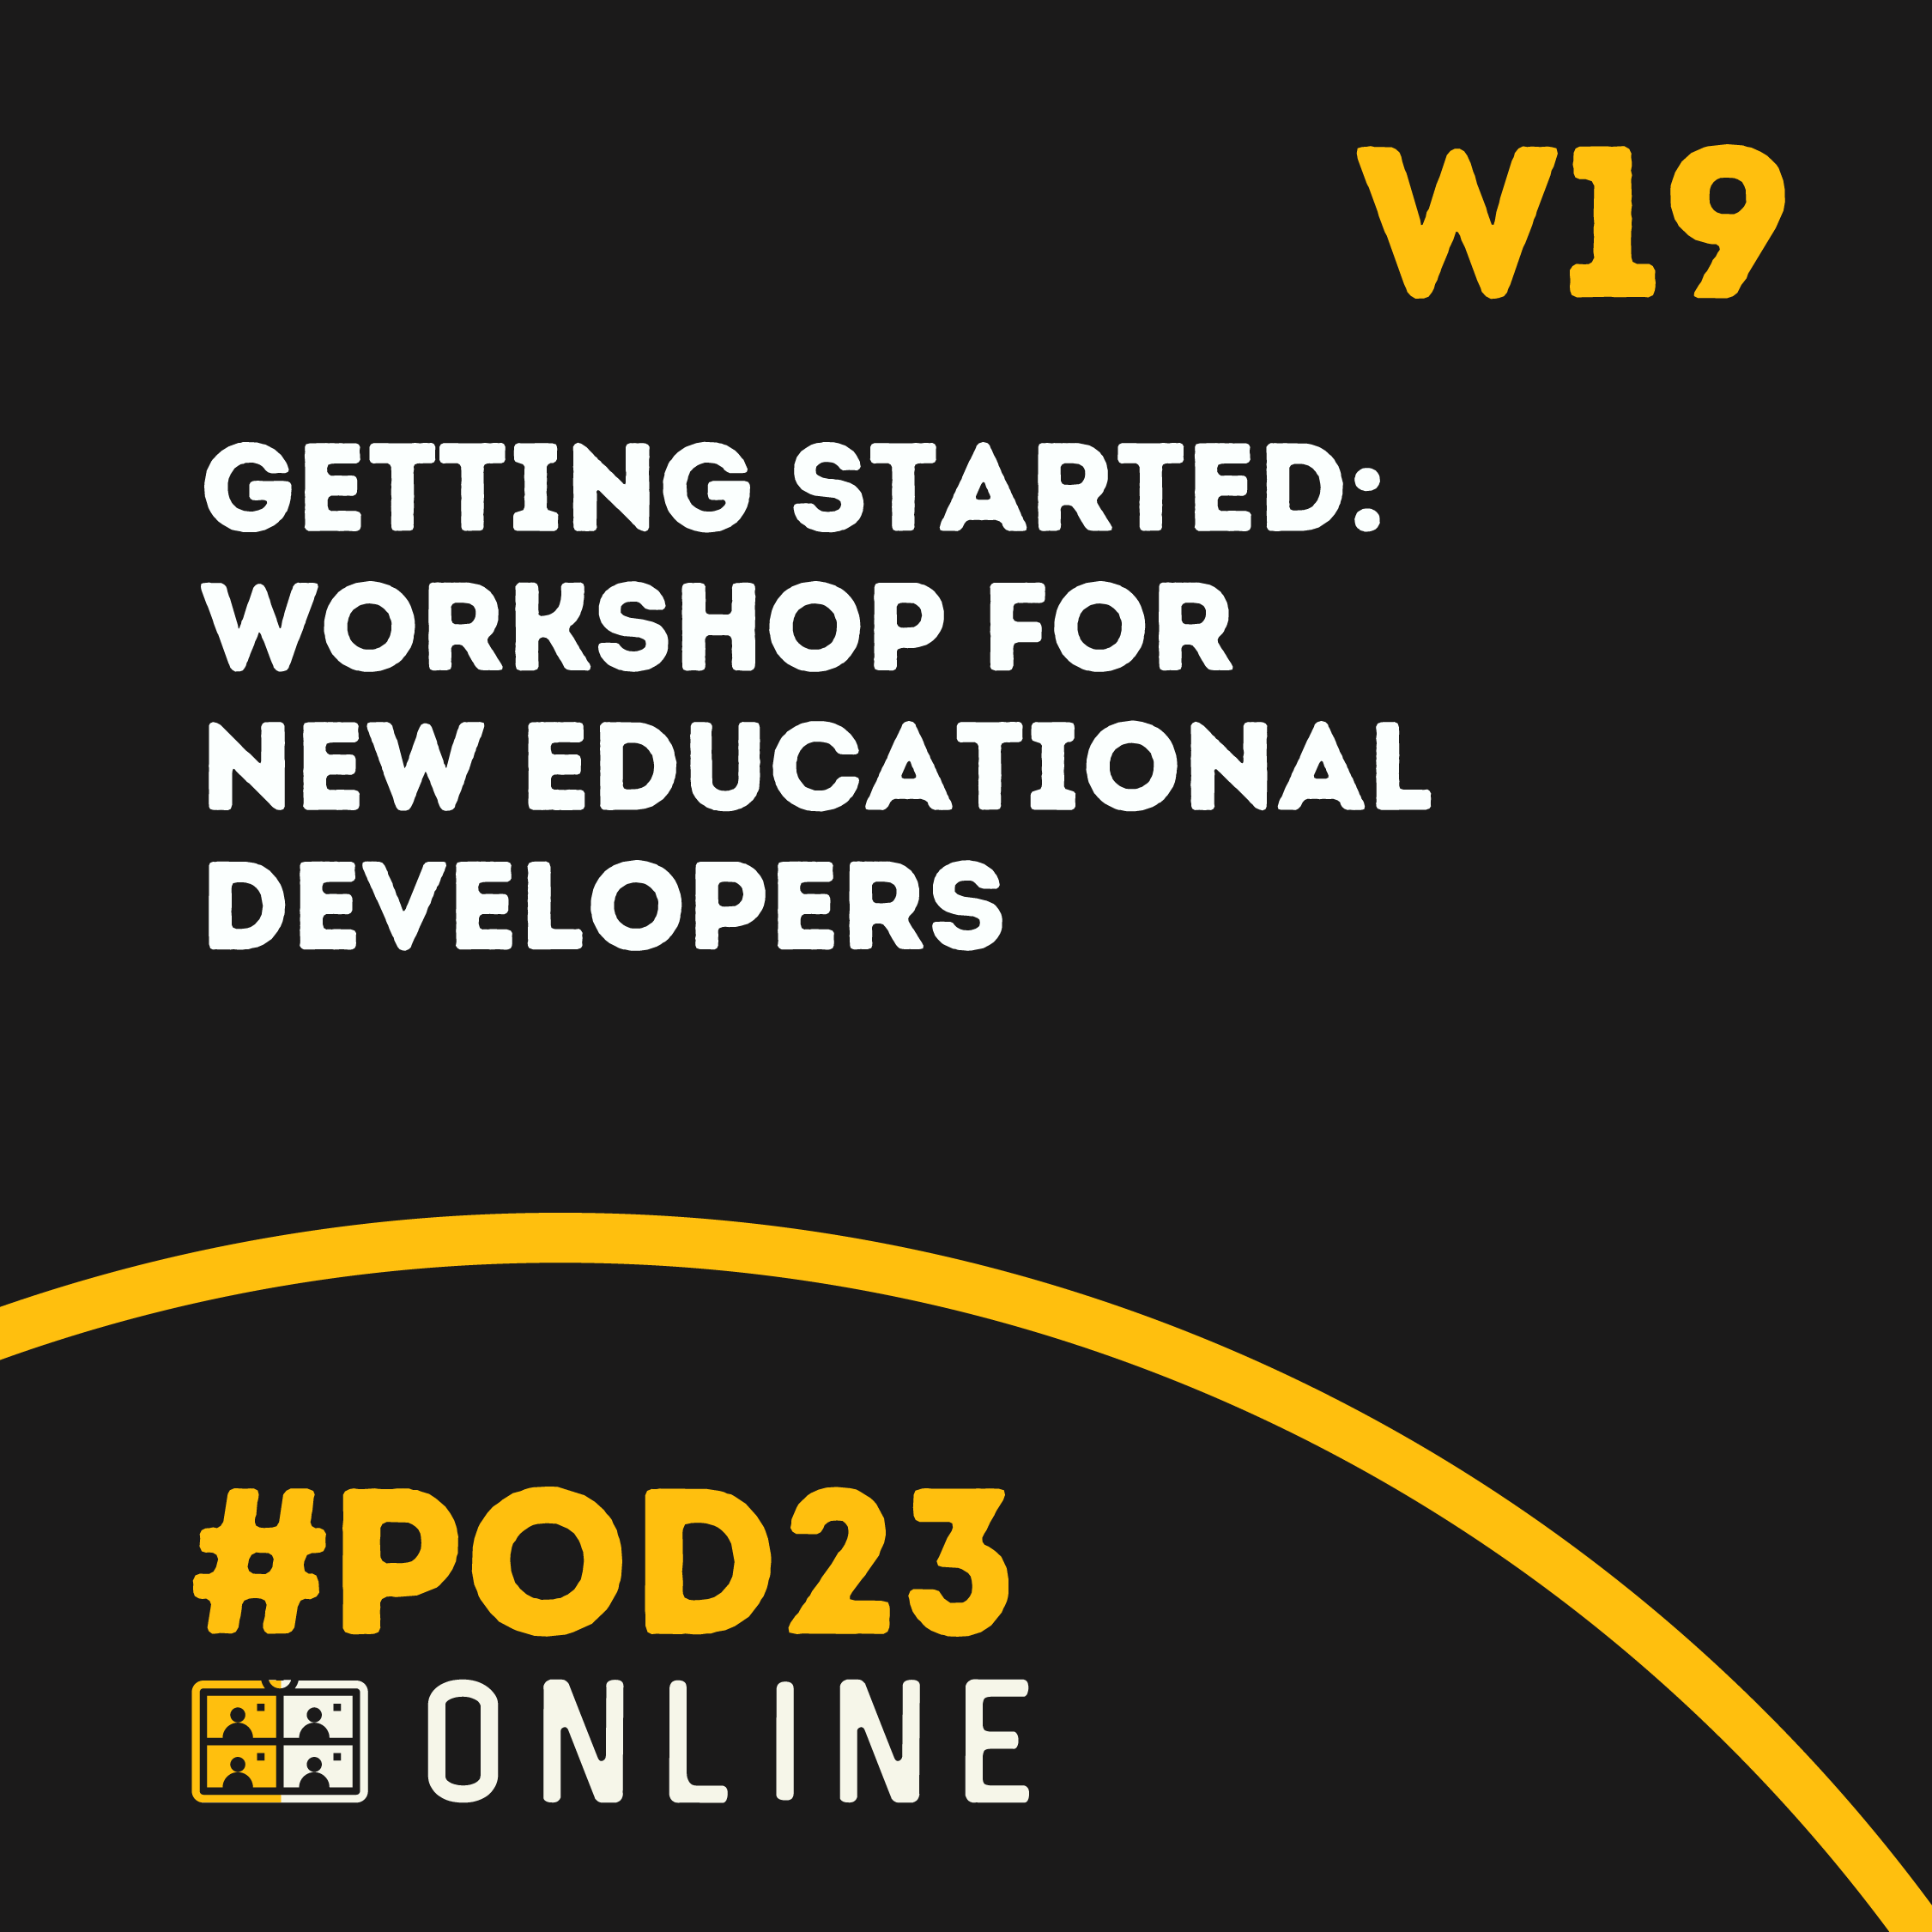 #POD23 Online W19: Getting Started Workshop for New Educational Developers